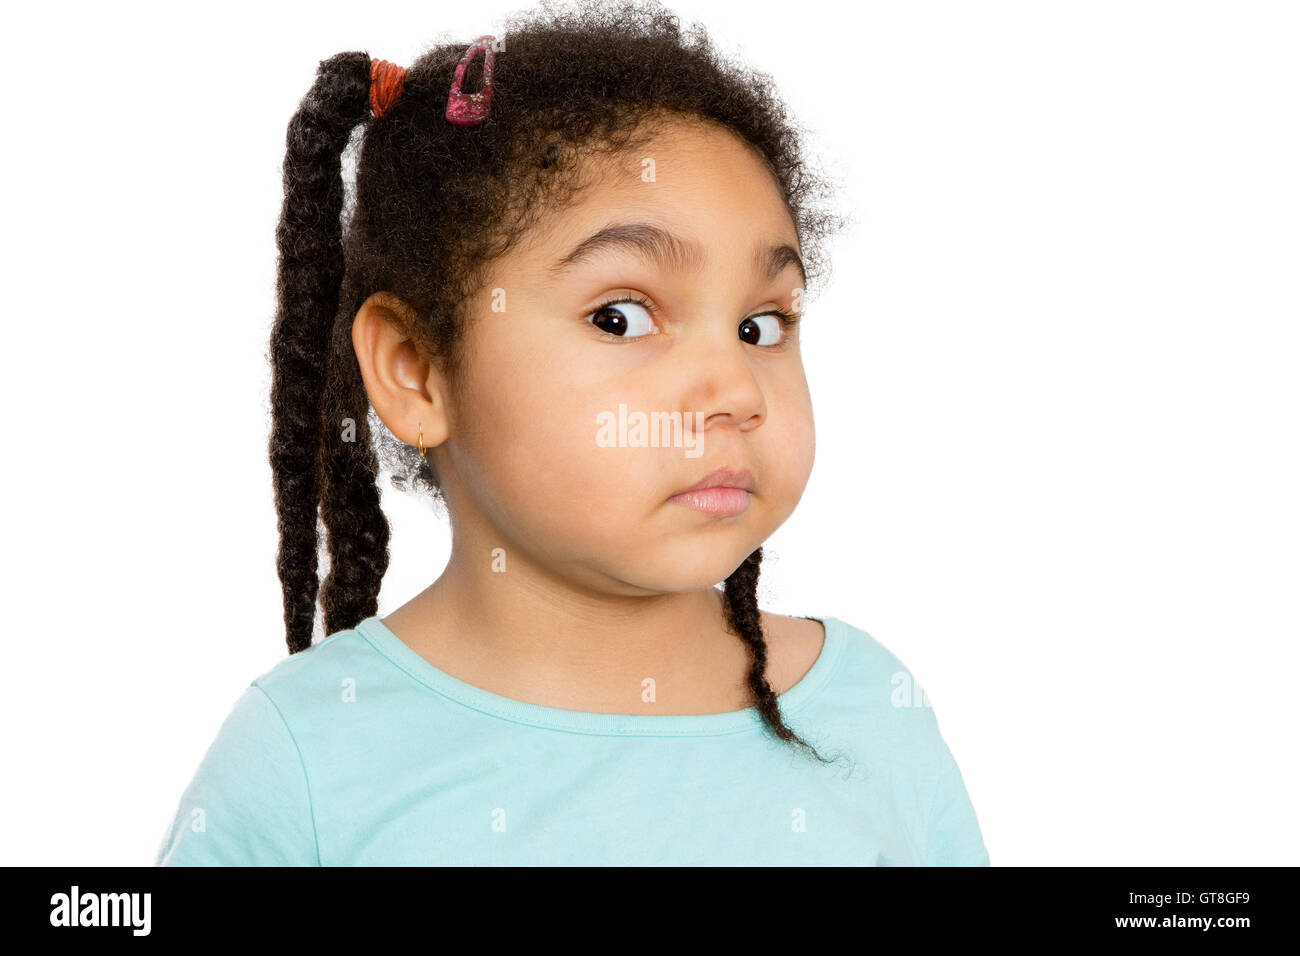 Close up Cute Young Girl Showing Surprised Facial Expression Against White Background Stock Photo